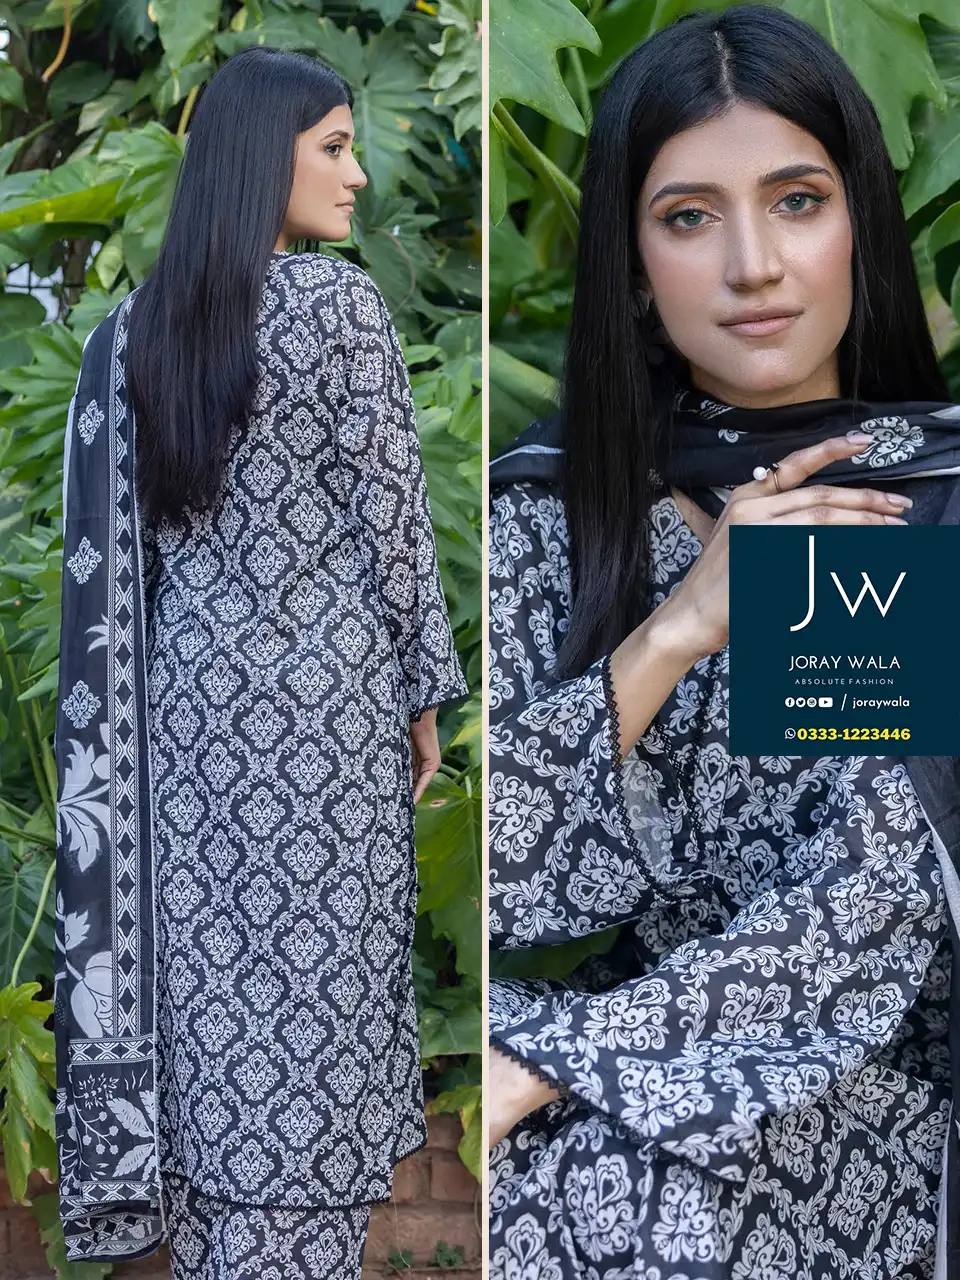 Iris allover black and white 3 pcs suit D7 with free delivery available at joraywala. AirJet Luxury Digital Printed Lawn Shirt. Airjet Luxury Digital Printed Lawn Dupatta. AirJet Luxury Digital Printed Trouser.